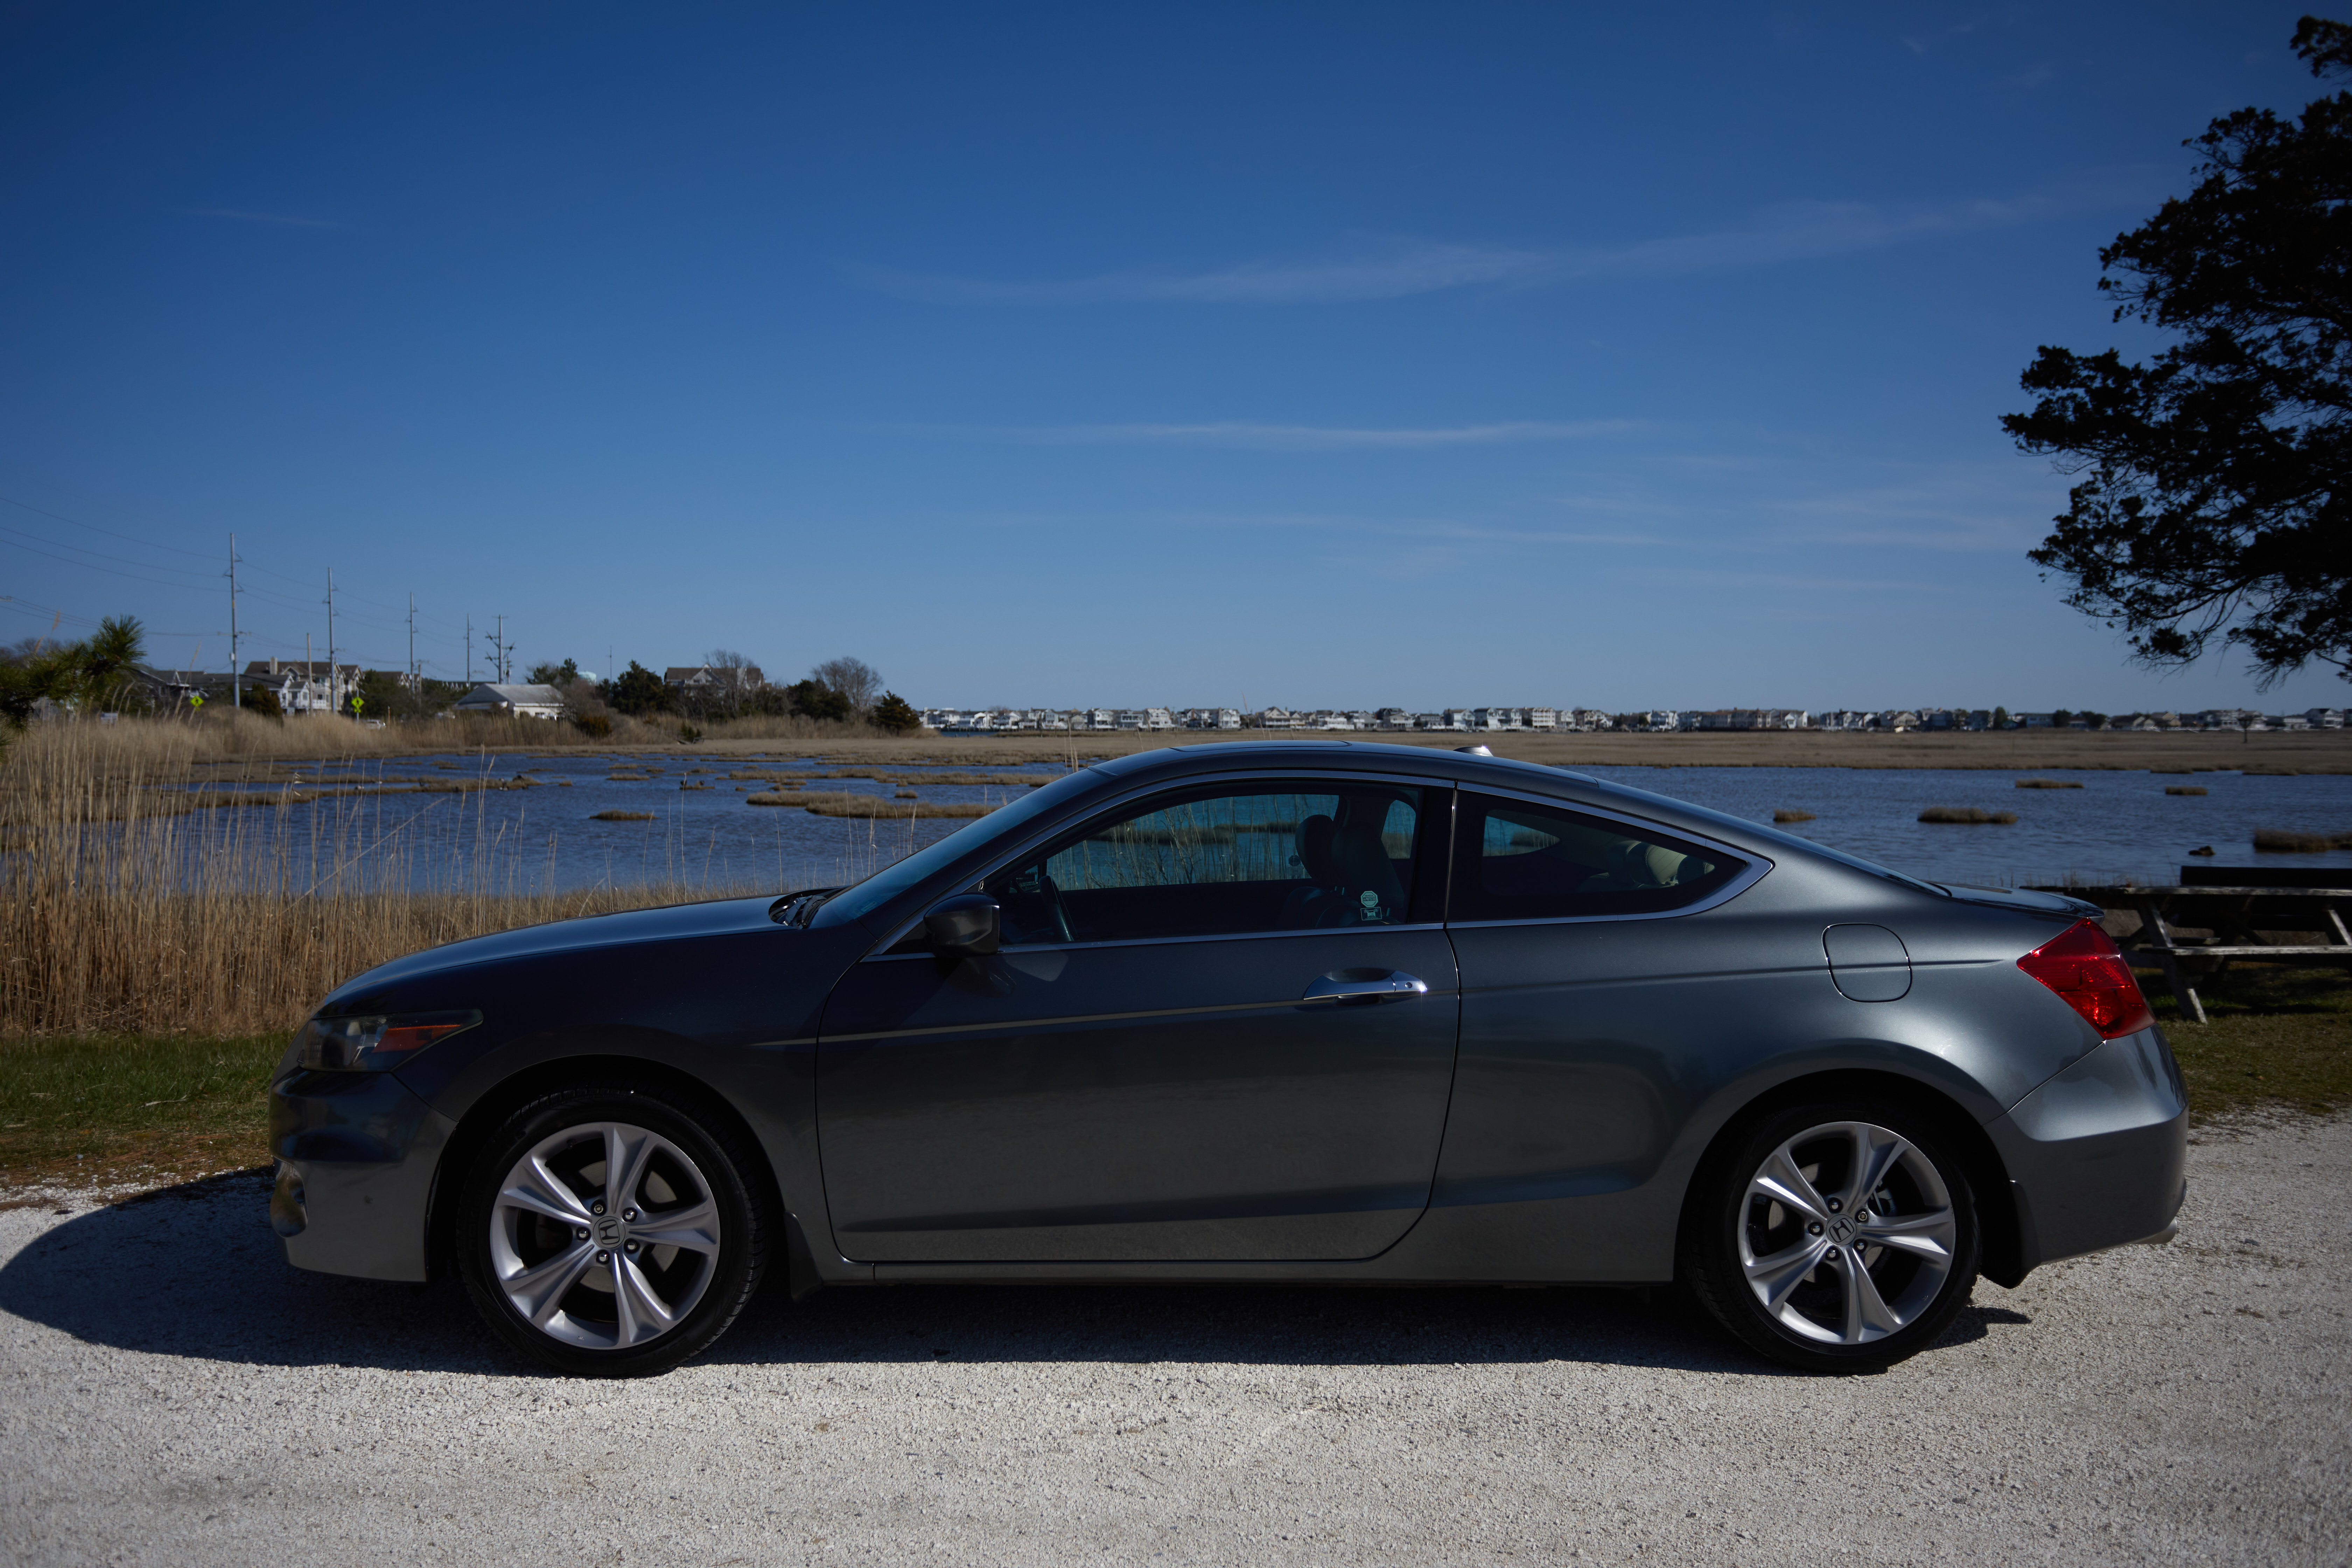 2012 Honda Accord parked in front of tidal marsh.